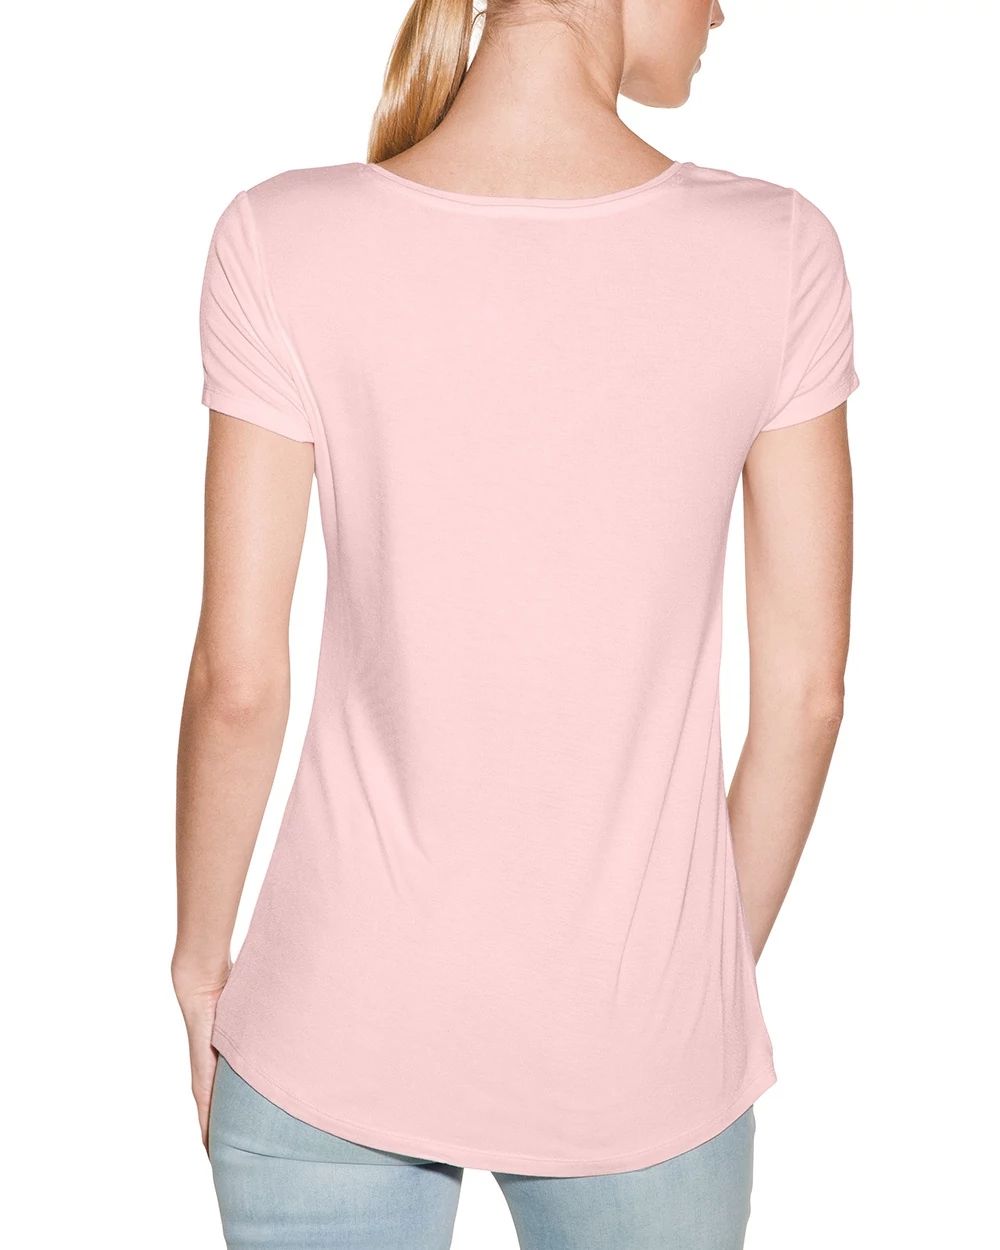 Outlet WHBM Floral V-Neck Foundation Tee click to view larger image.